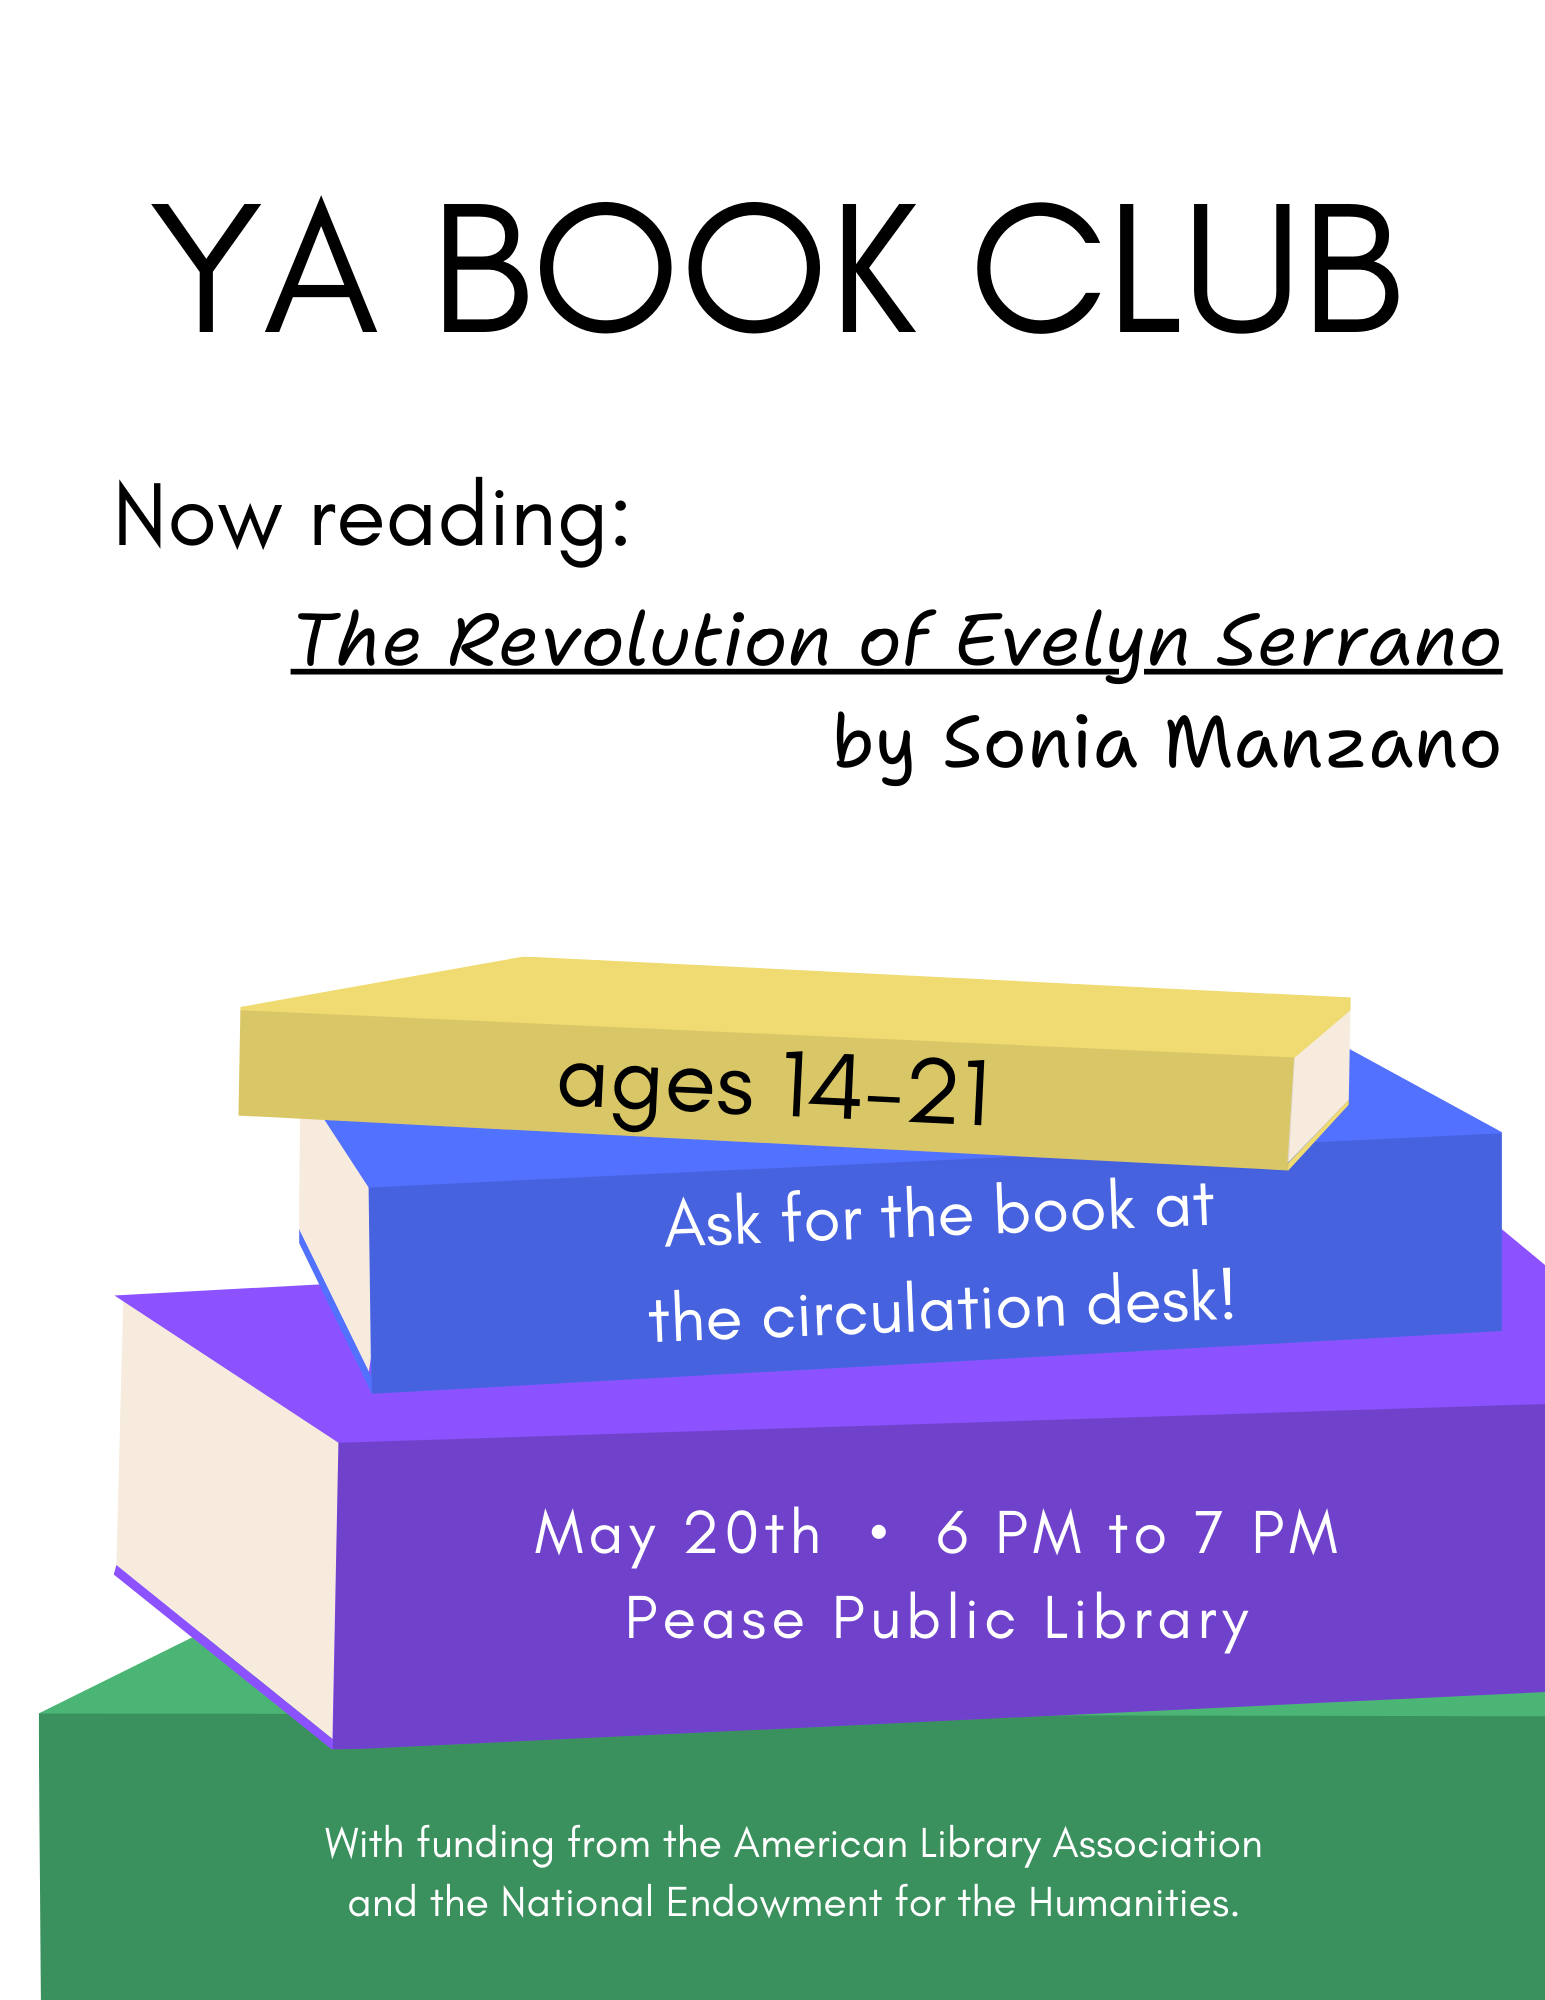 YA book club is reading The Revolution of Evelyn Serrano for our May 20th meeting. Readers ages 14-21 can join us at 6pm. Ask for the book at the circulation desk!